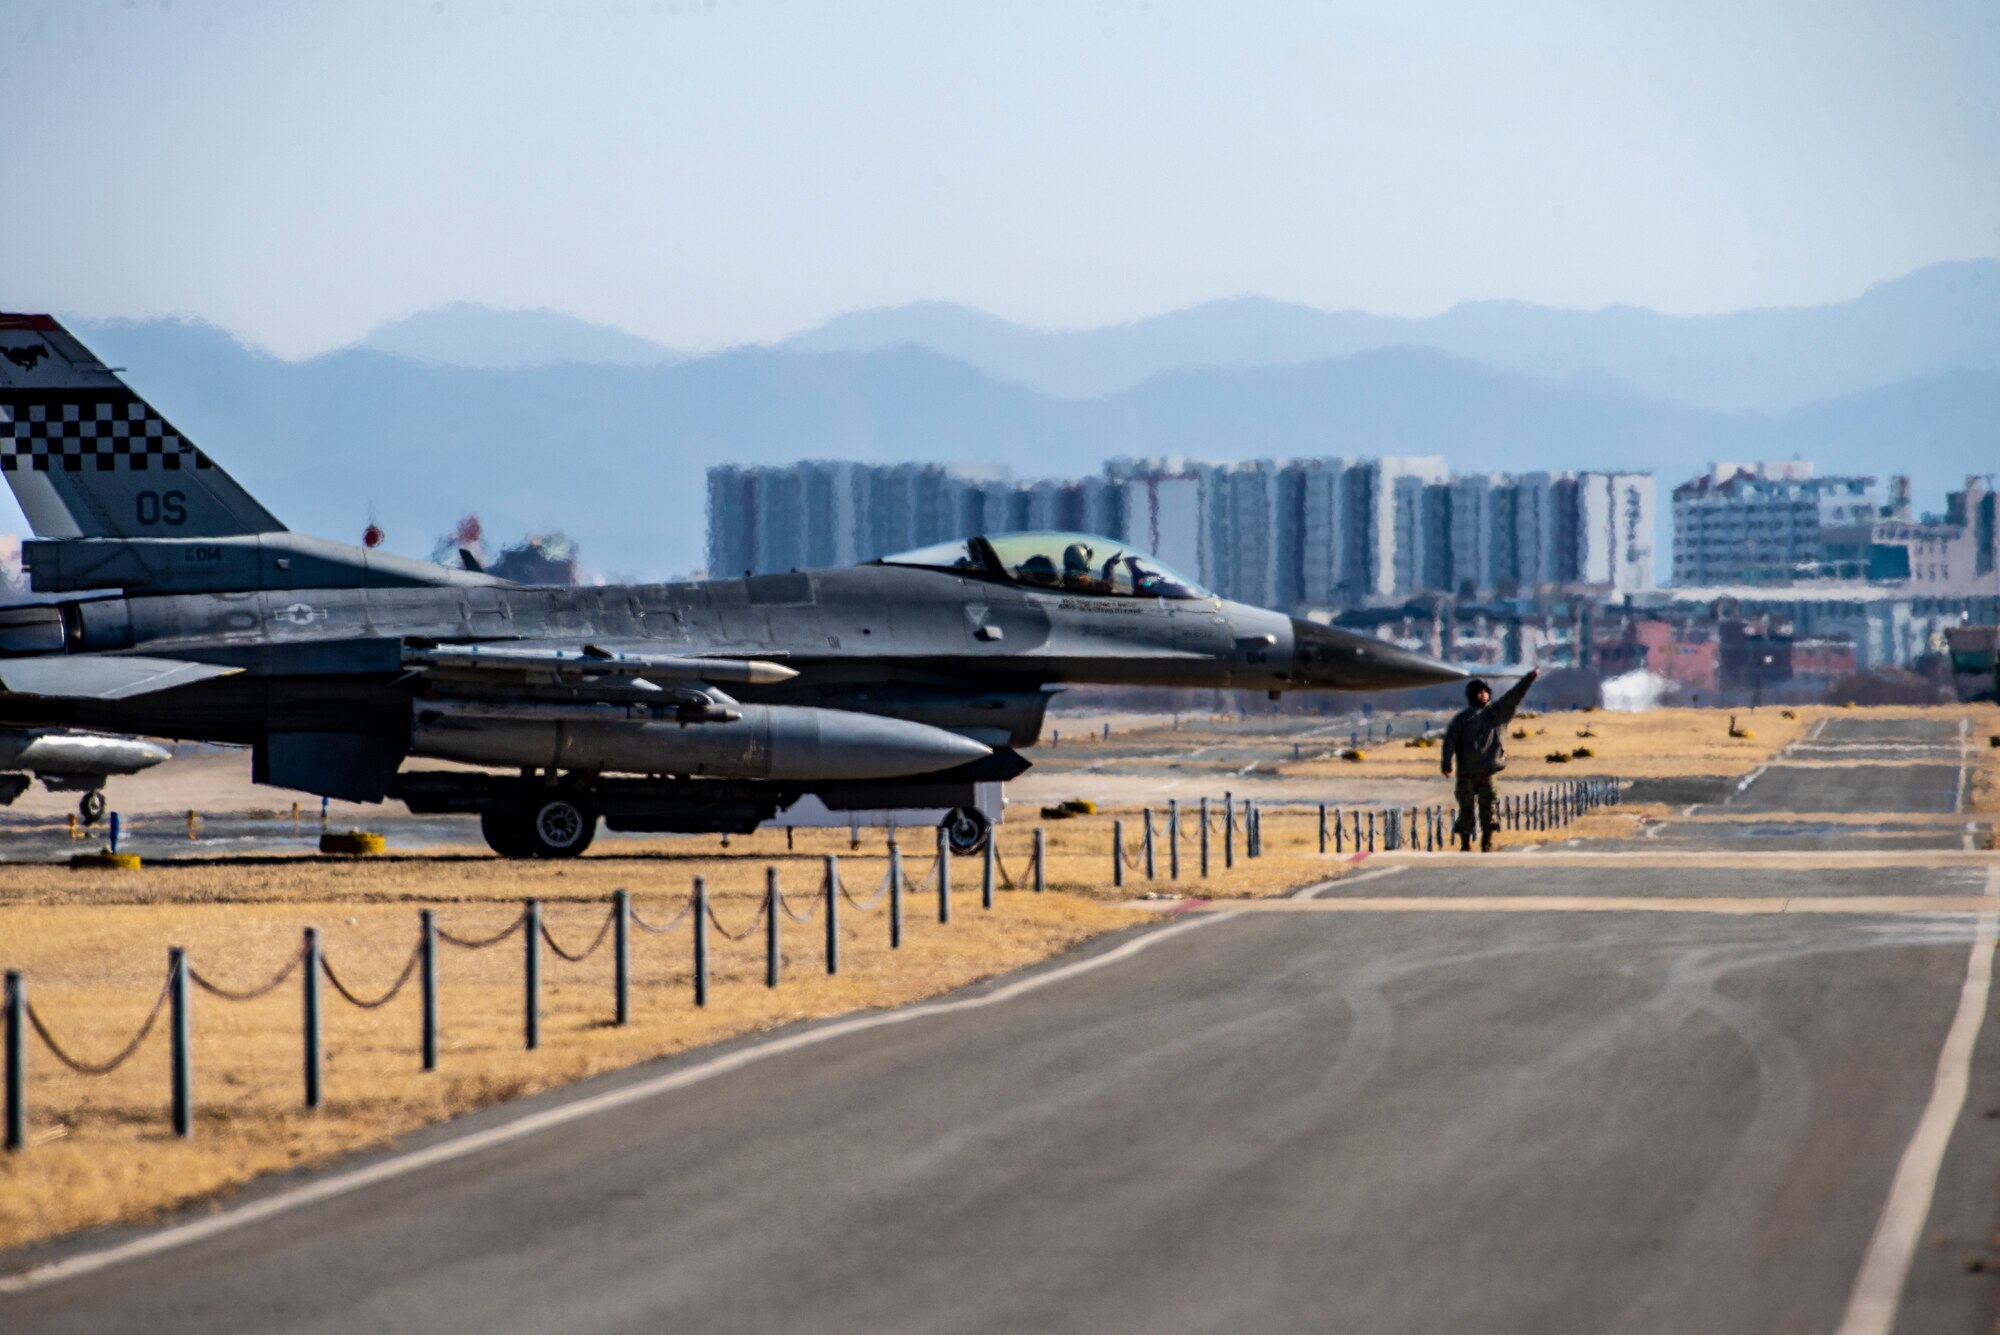 A U.S. Air Force Airman, 51st Fighter Wing, directs an F-16 Fighting Falcon during a routine training event at Daegu Air Base, Republic of Korea, Jan. 30, 2023.